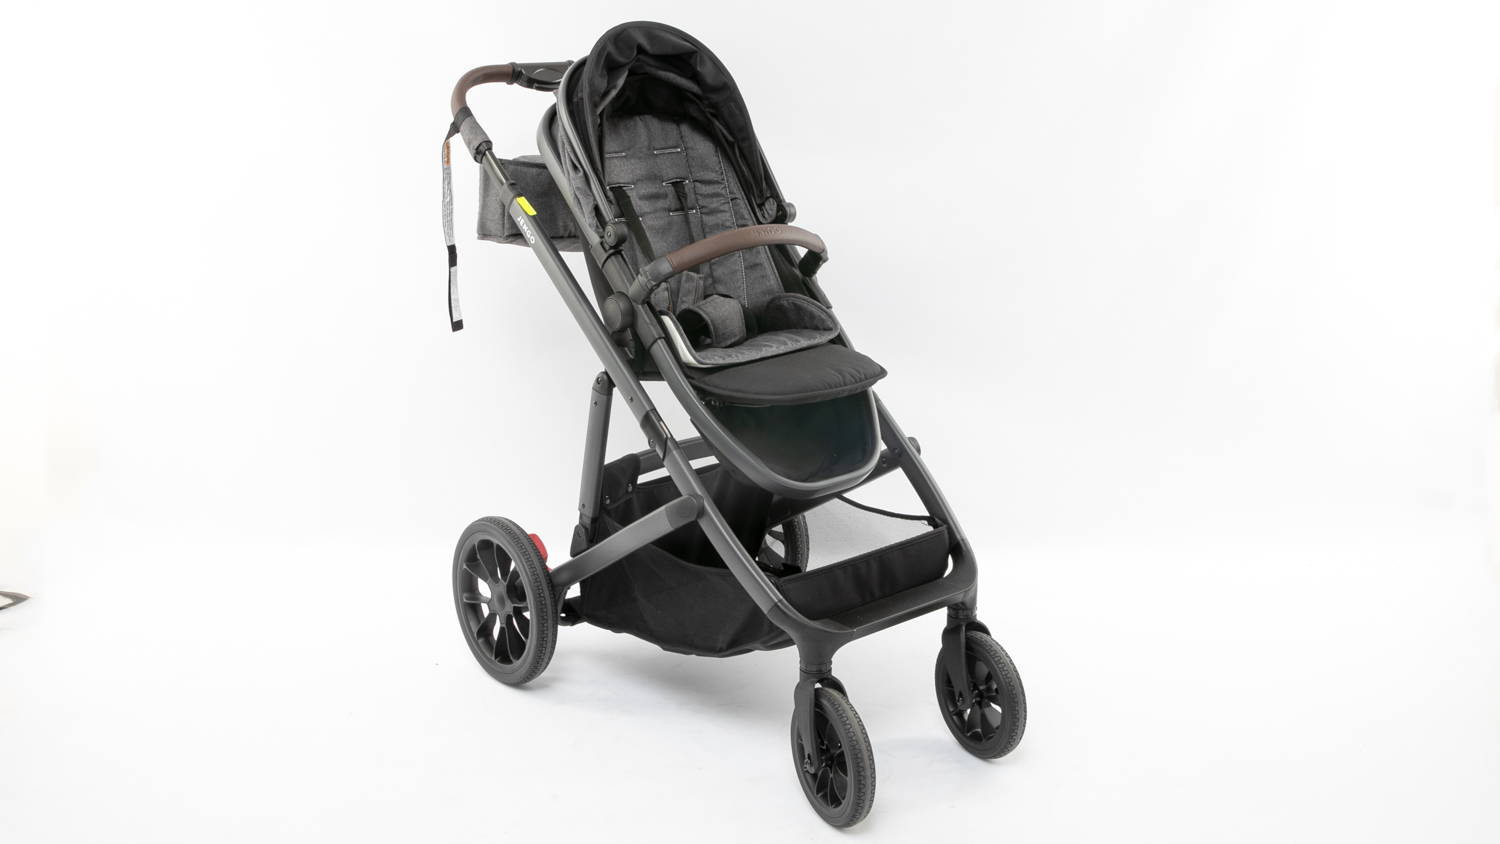 Jengo Strand Review | Pram and stroller | CHOICE